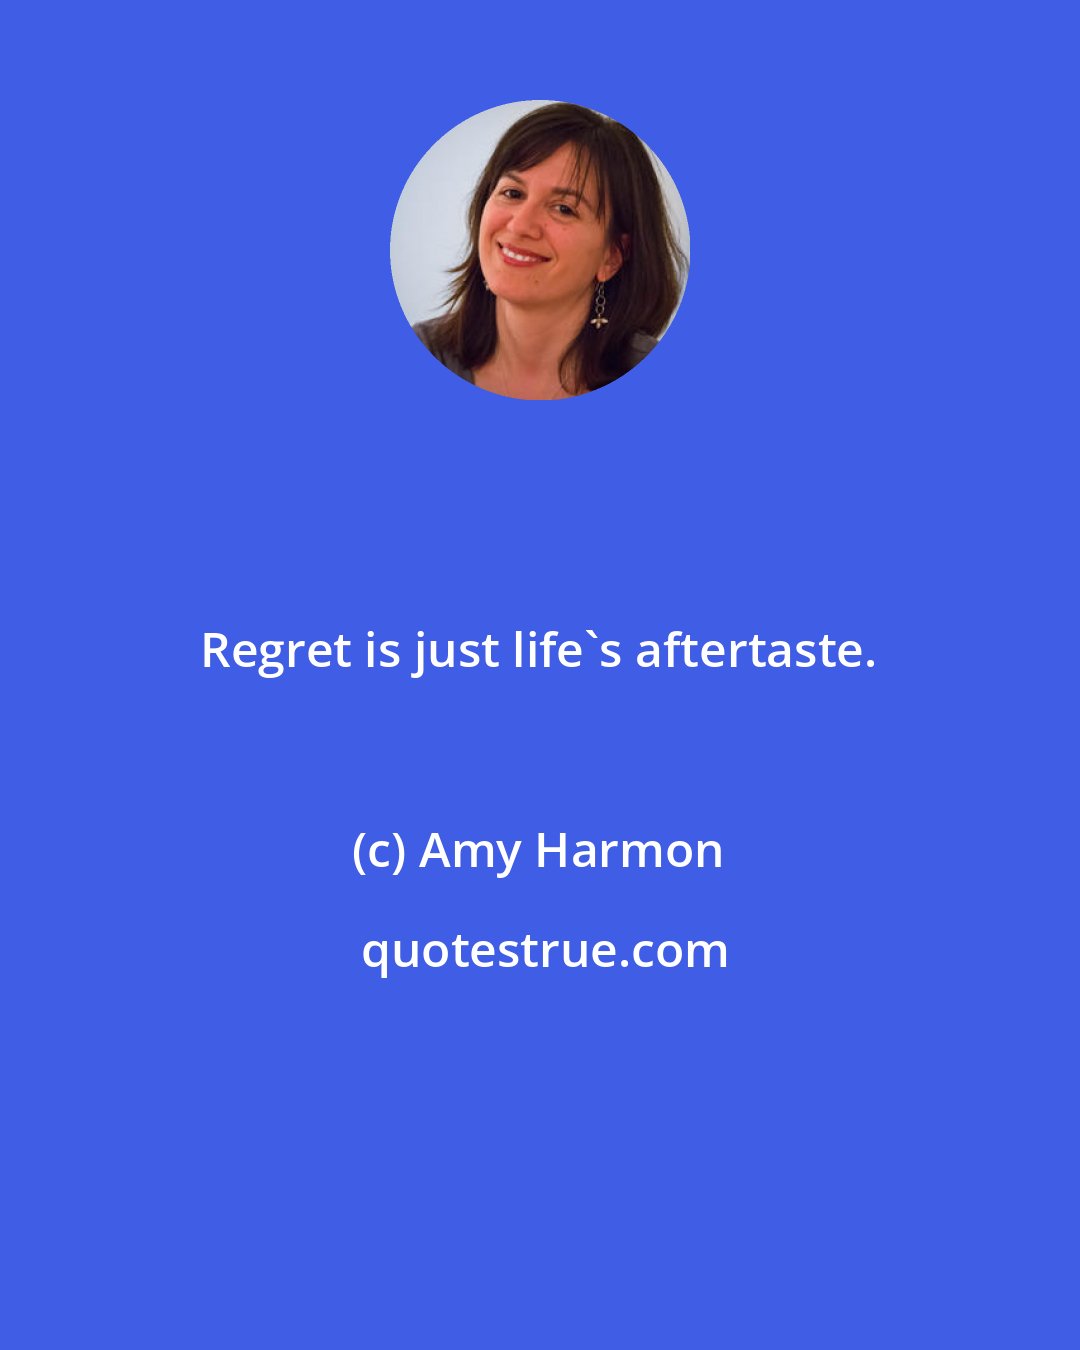 Amy Harmon: Regret is just life's aftertaste.